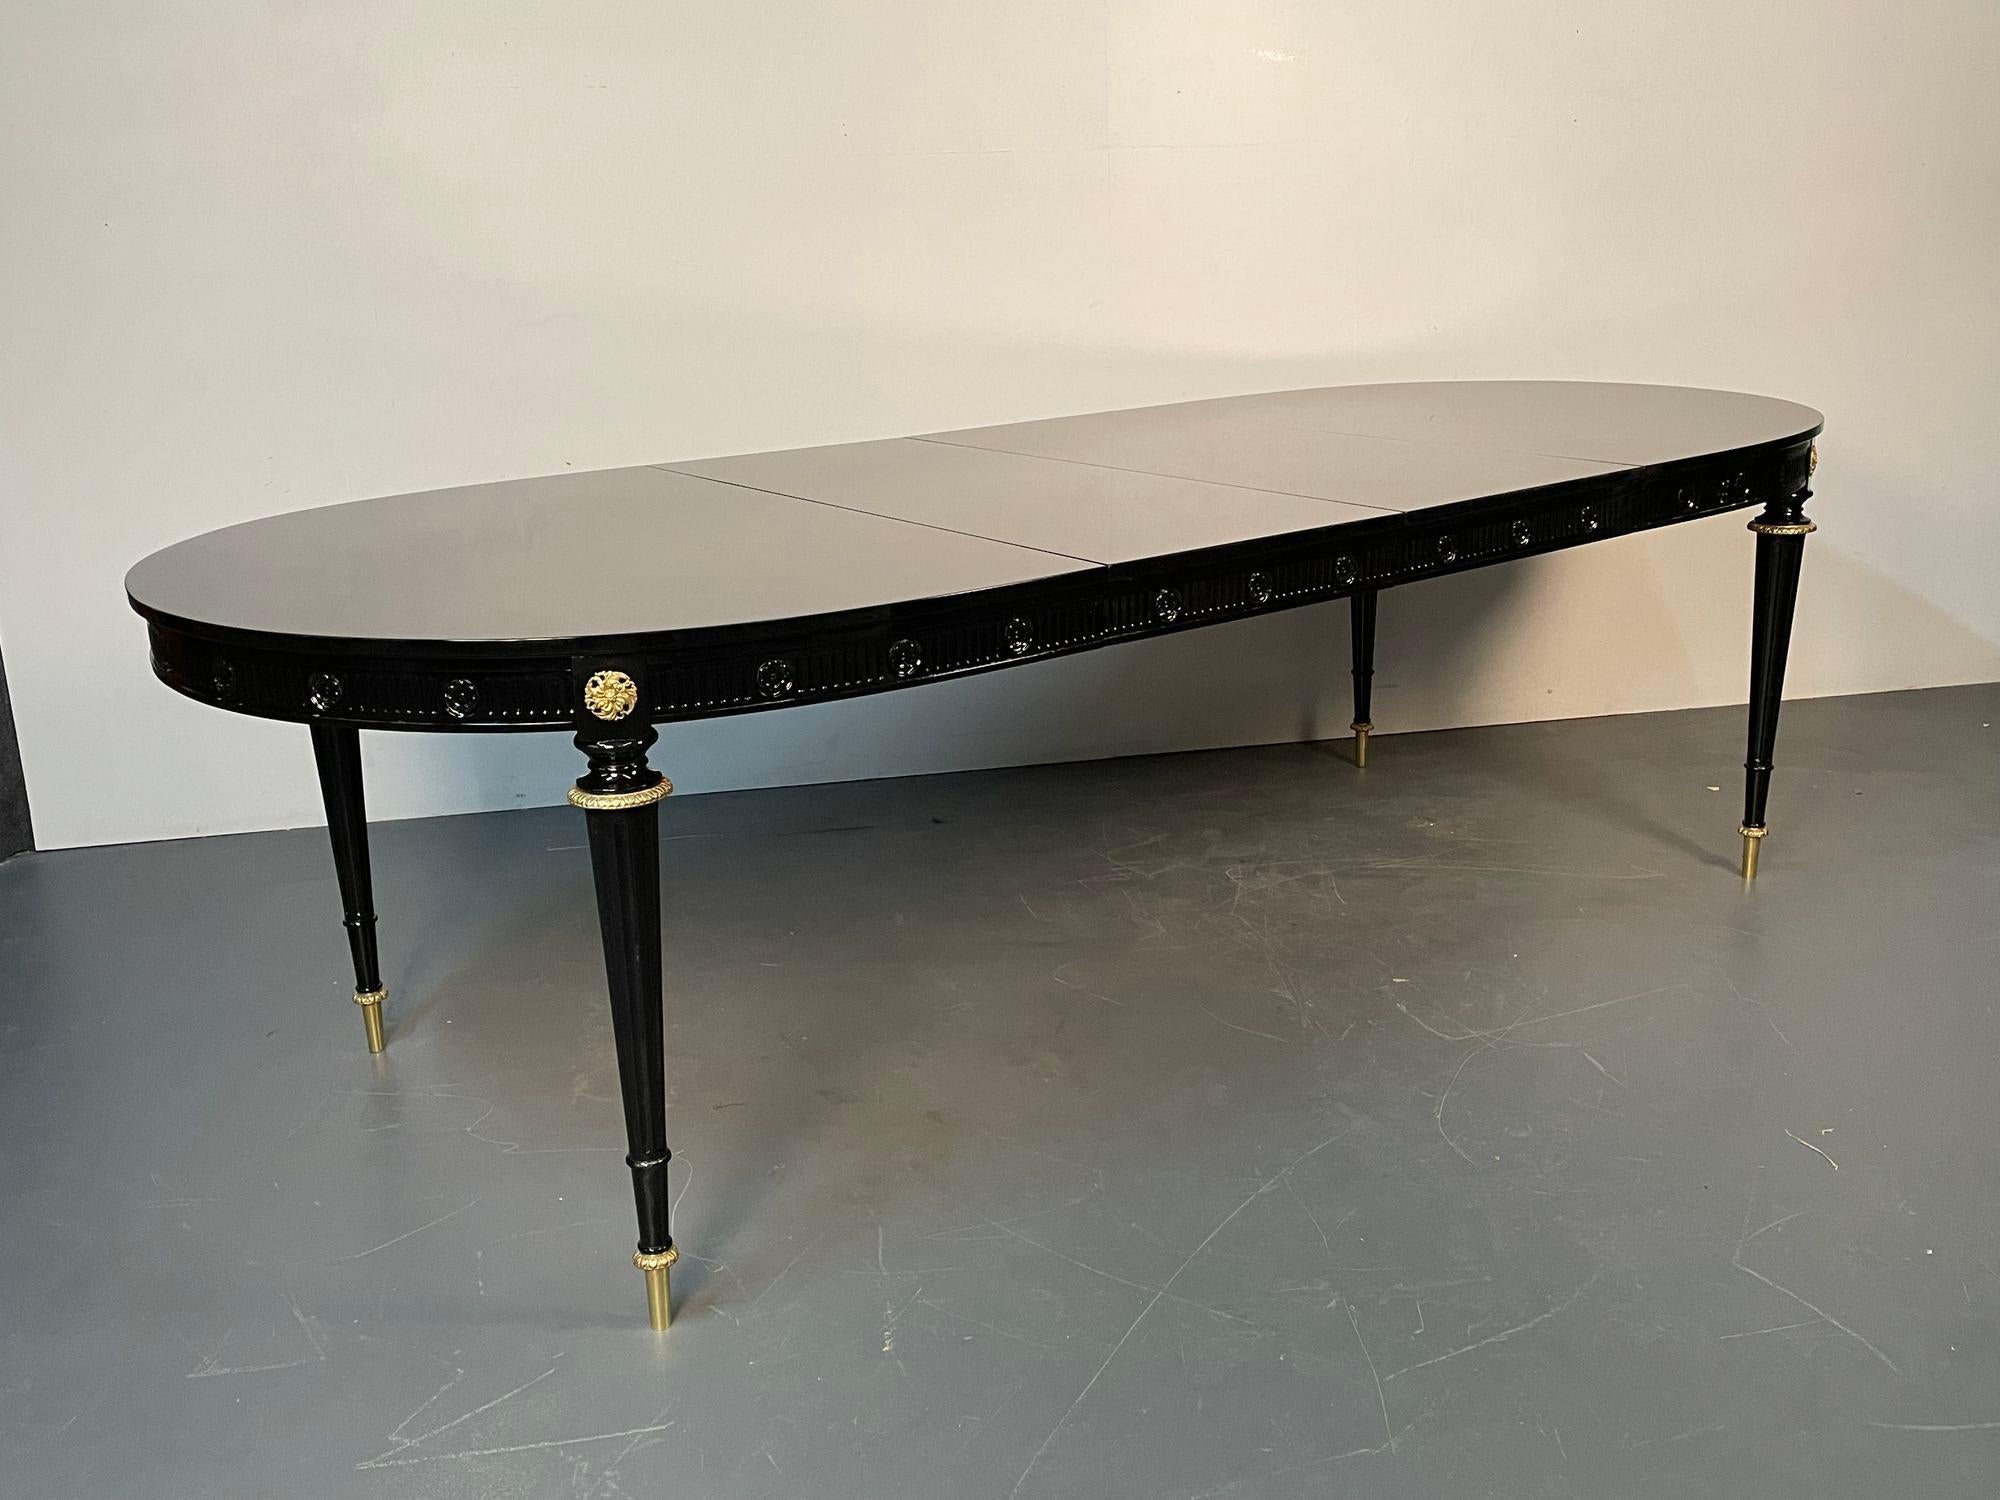 Hollywood Regency Dining Table, Jansen Style, Ebony Lacquer, Hand Carved, Bronze
This stunning recently refinished dining table in the manner of Maison Jansen is simply spectacular. A rare and important dining table having thin tapering legs